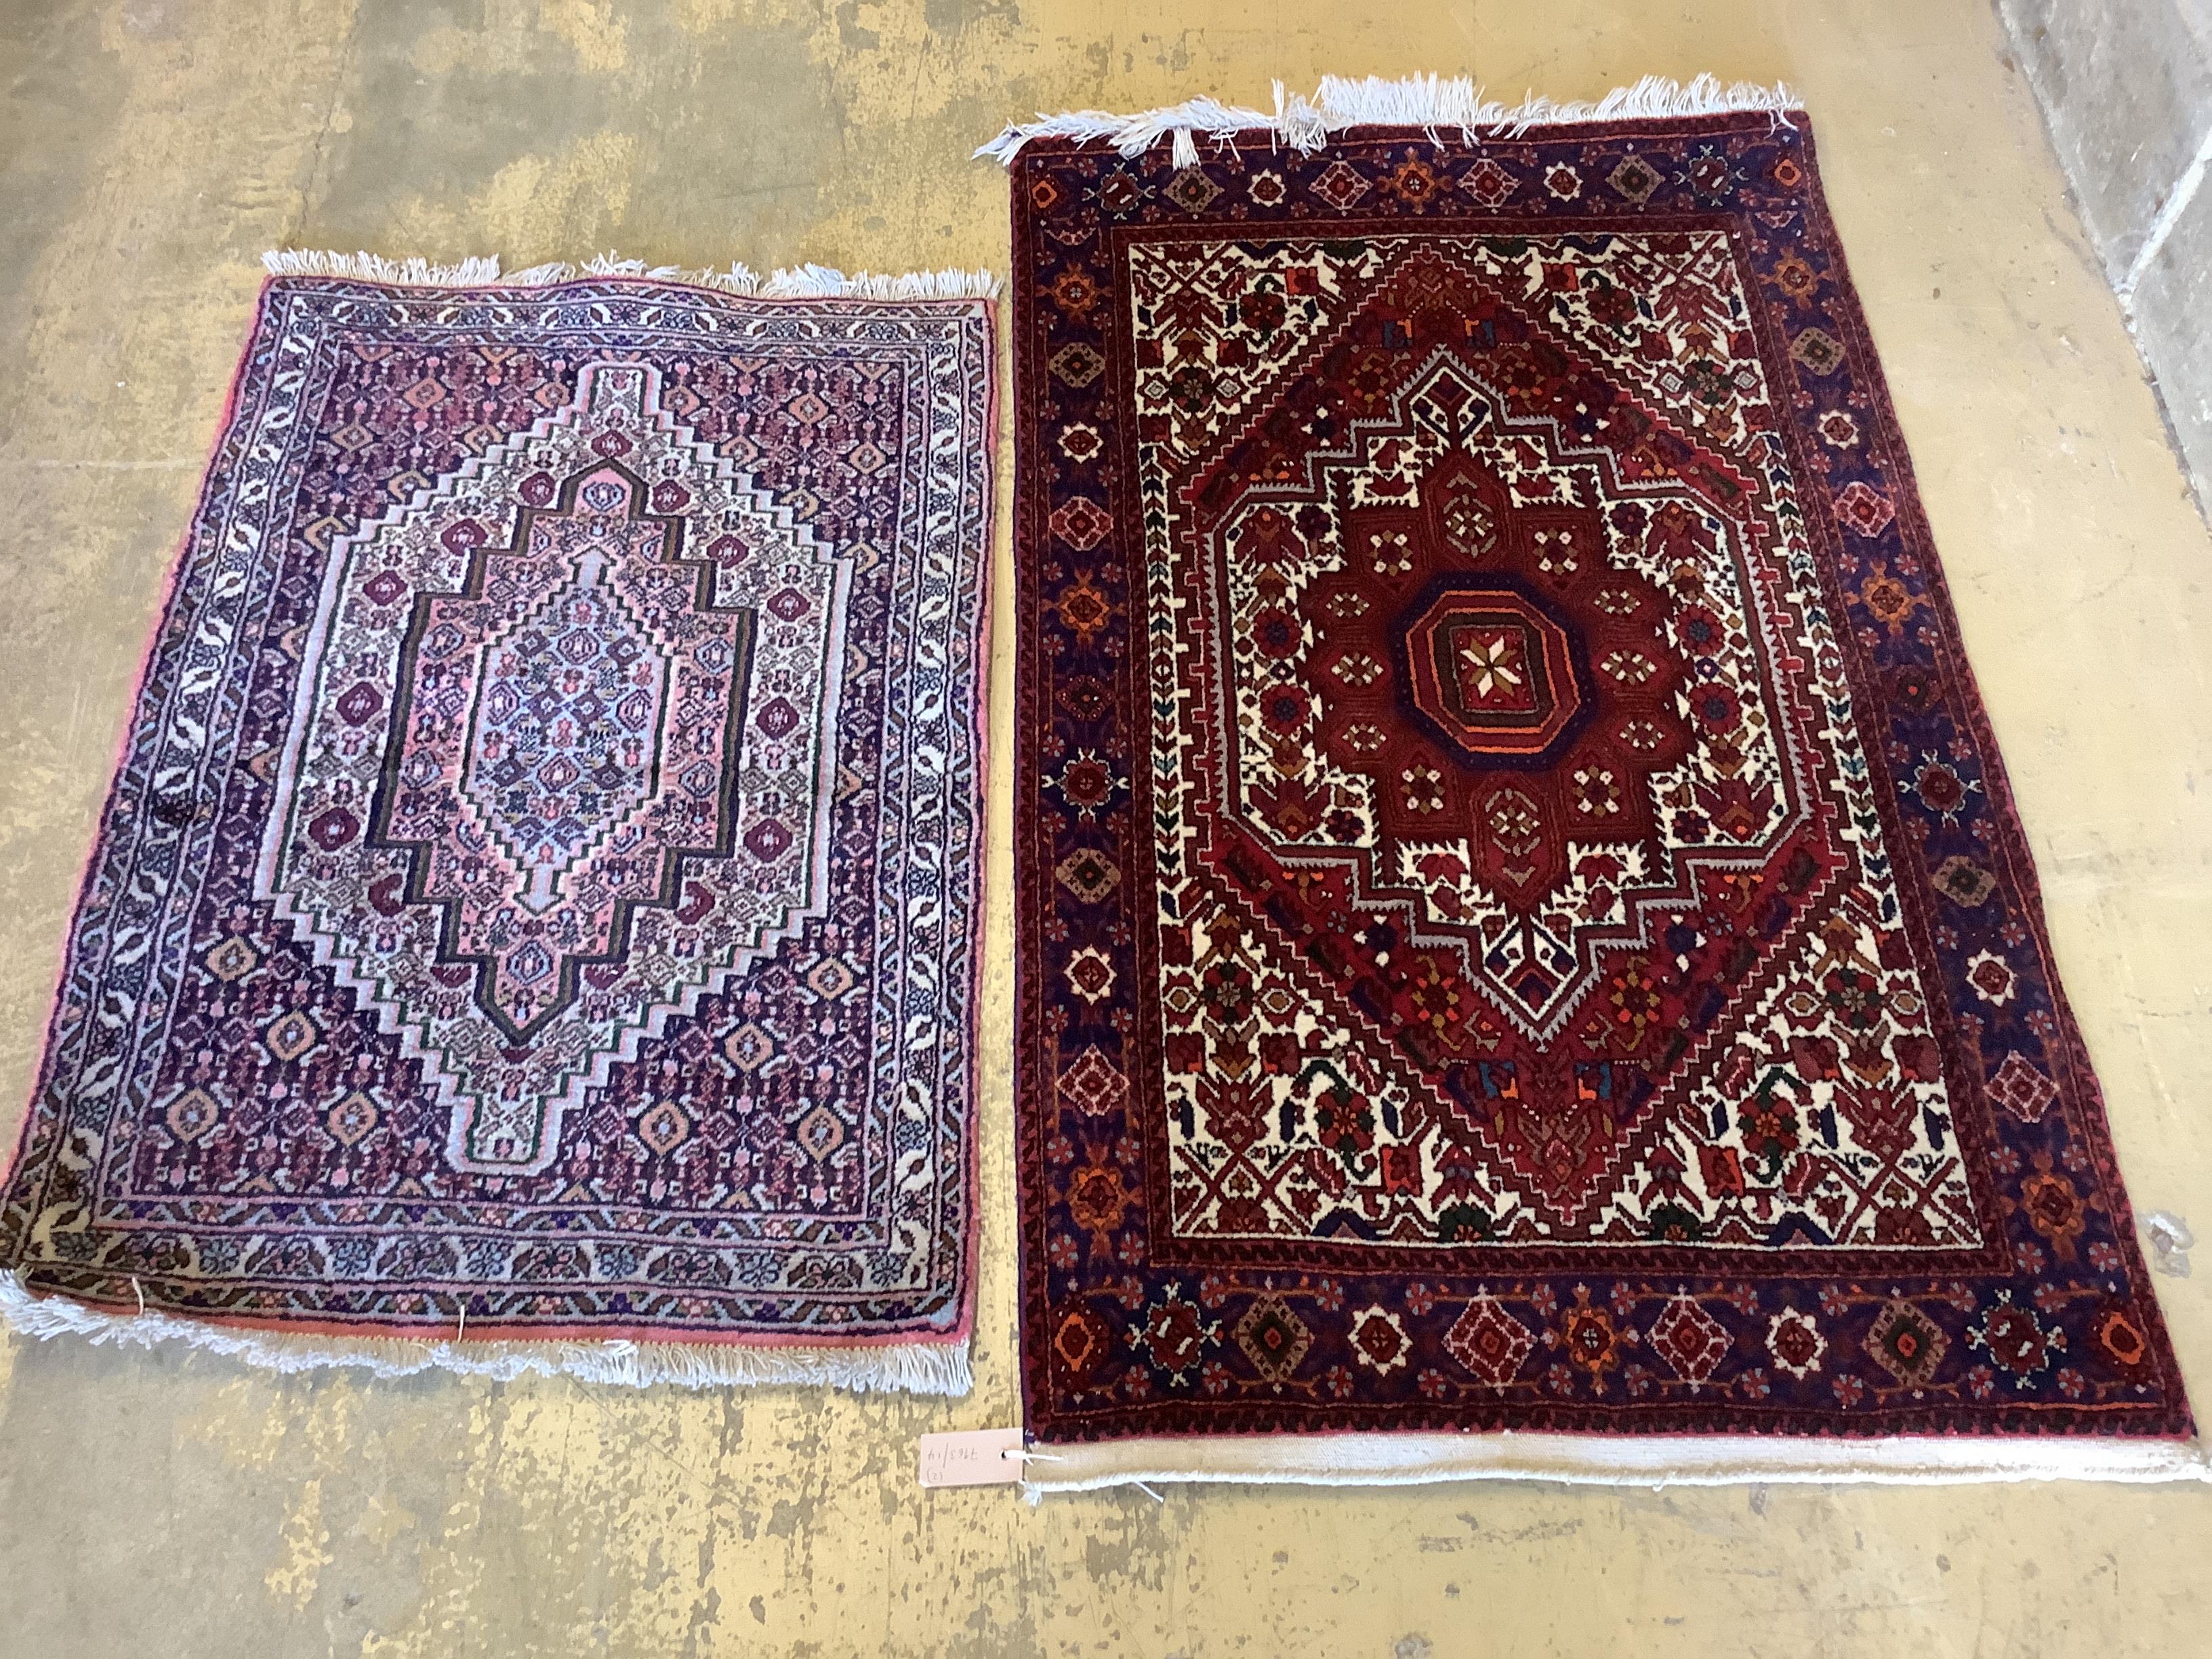 Two Senneh red ground mats, larger 130 x 80cm